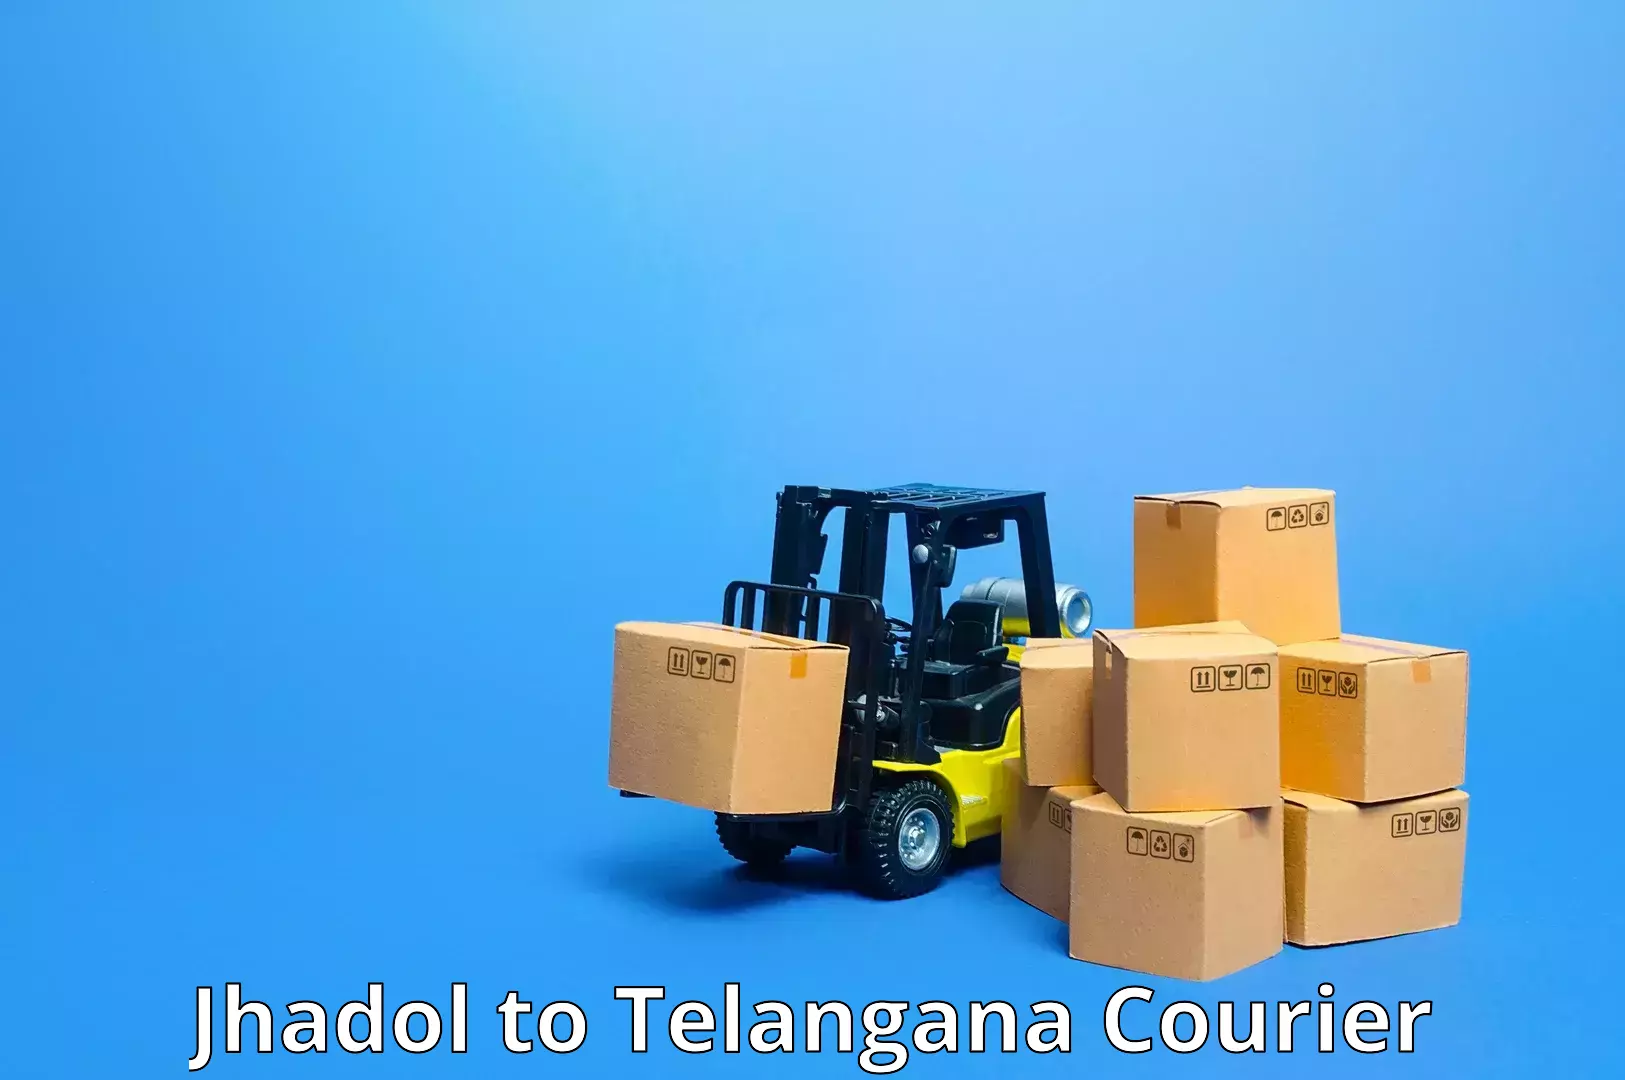 Business delivery service Jhadol to Bhainsa